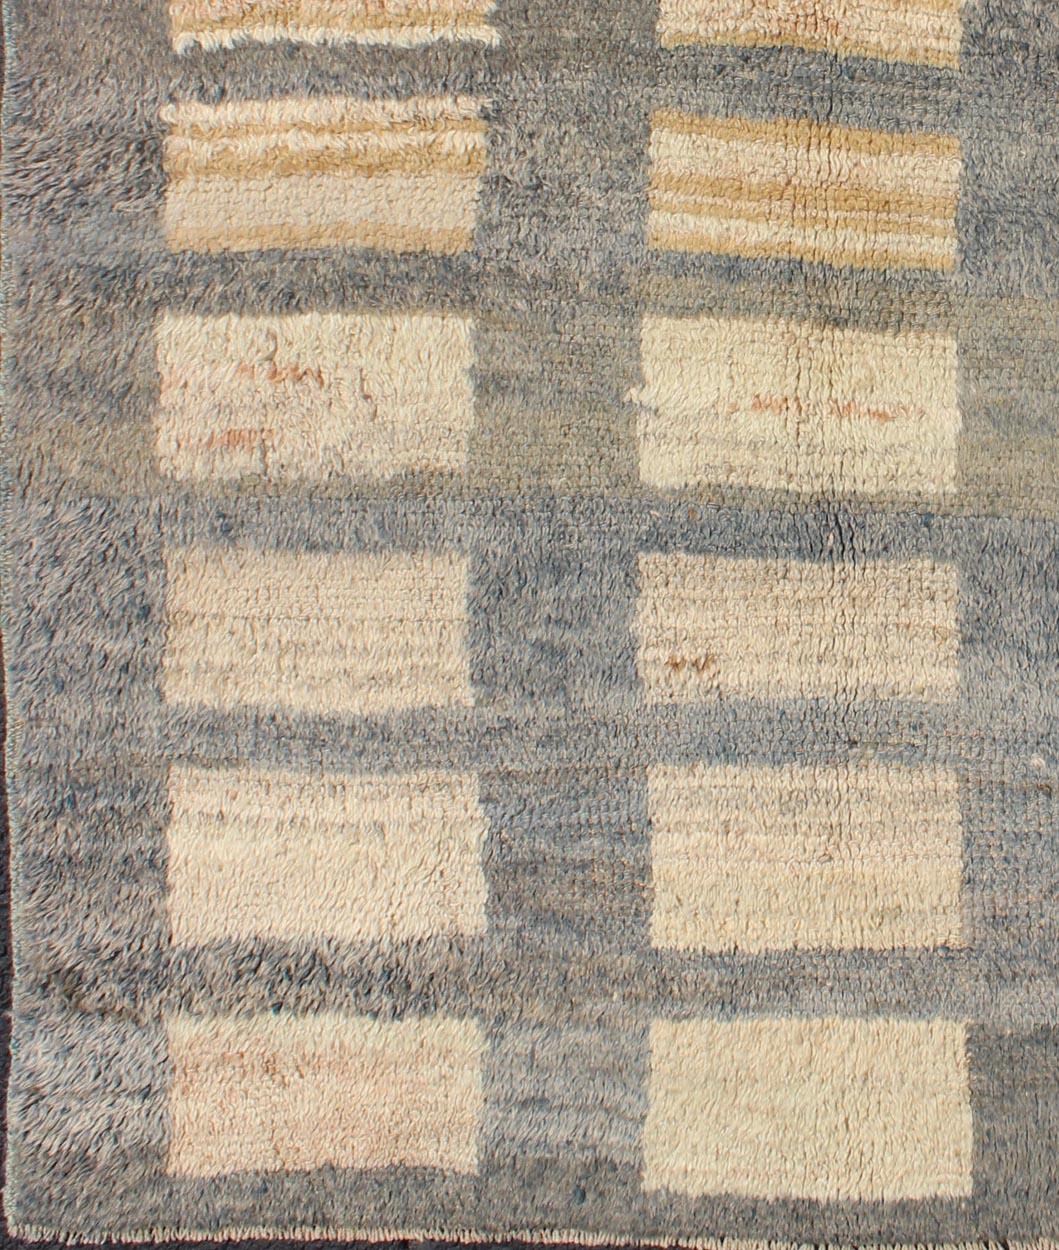 This Tulu carpet features sand colored rectangular shapes with gray outlines. Tulus are woven in the Konya area with a coarser weave. The wool used in these rugs is exceptionally durable, and they are always visually polished.

Measures: 3'6'' x